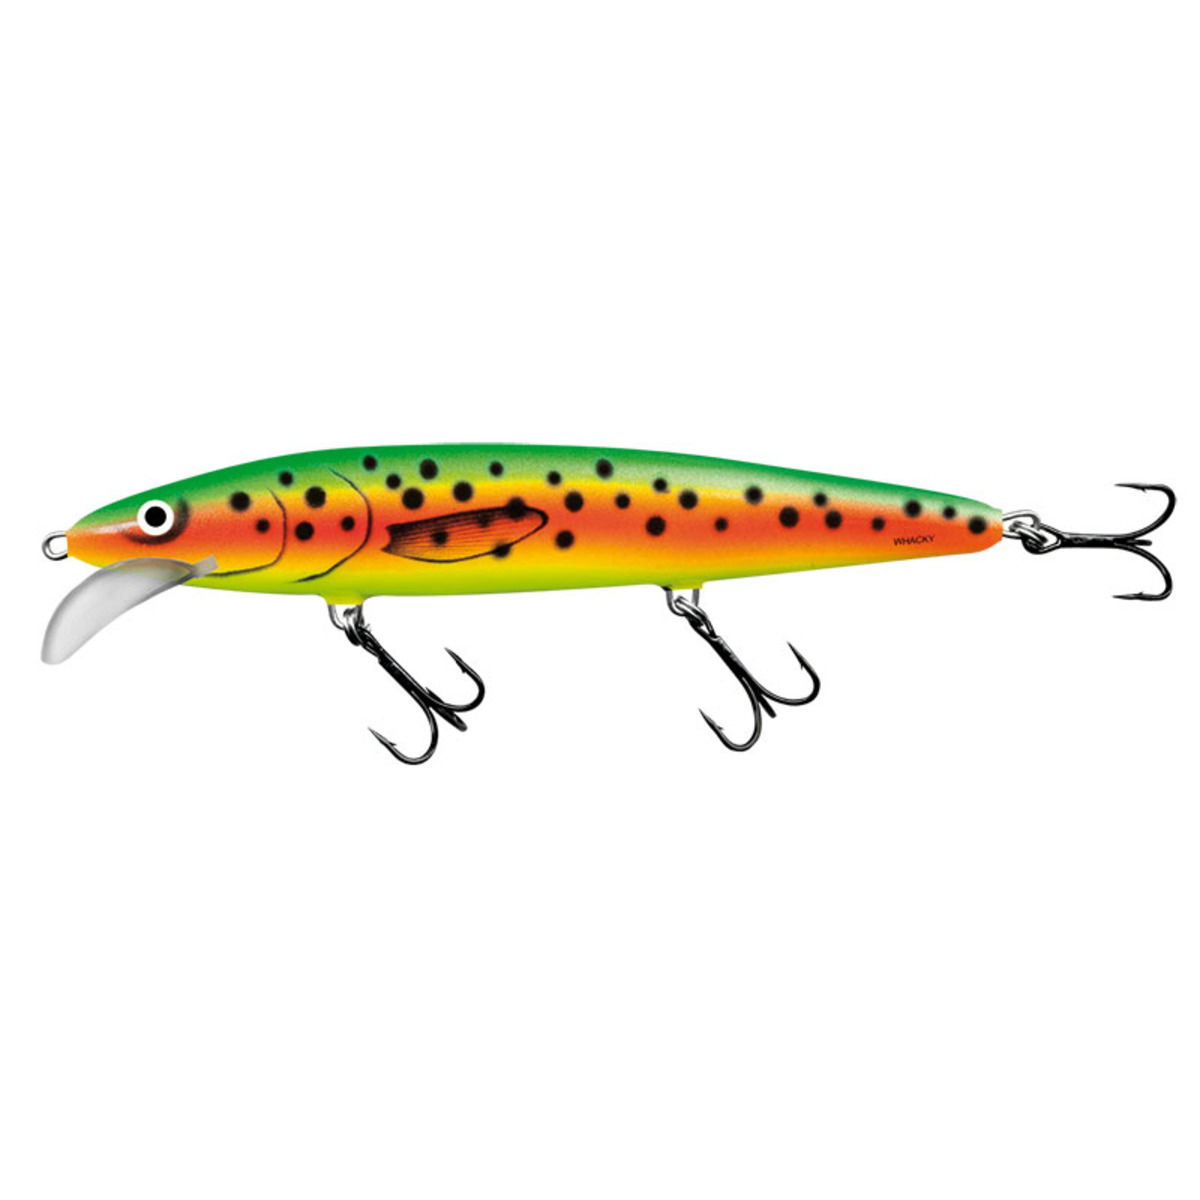 Salmo Whacky Floating - 15 Cm - Spotted Parrot